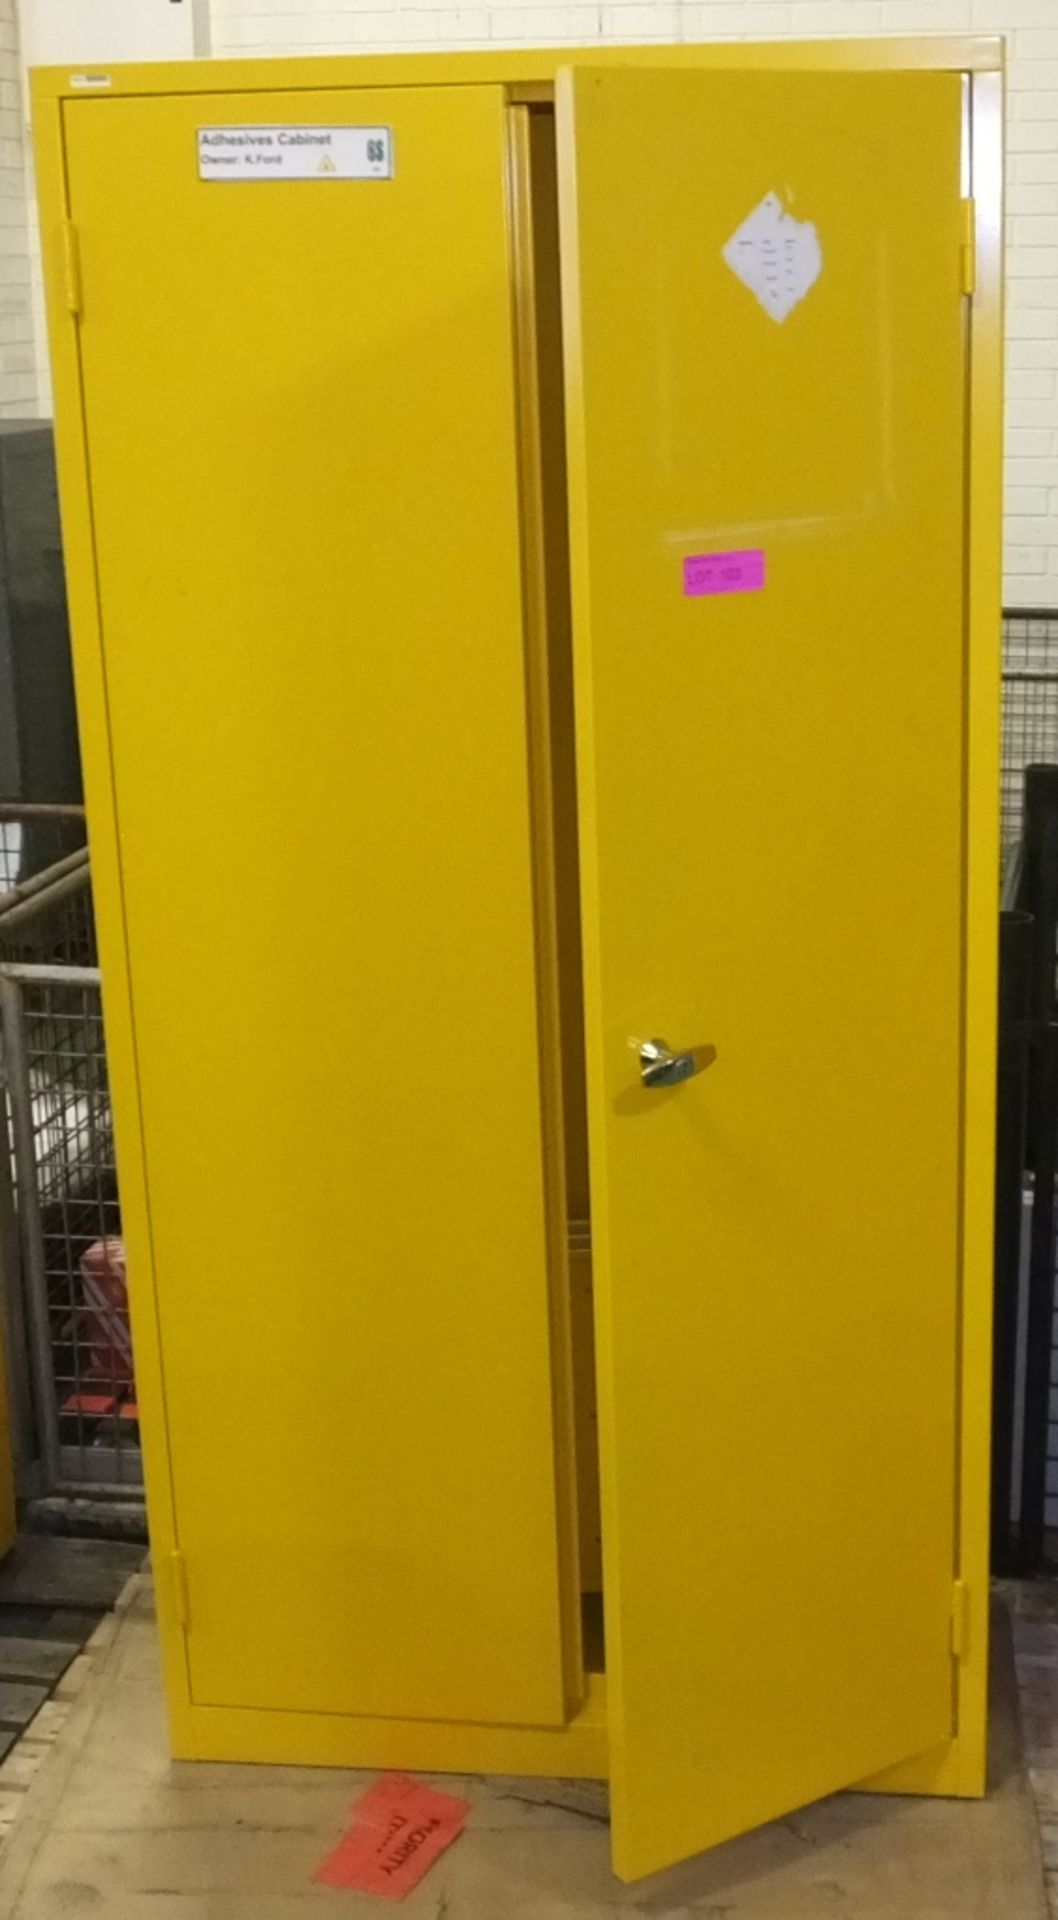 Chemical Store Cabinet L920 x W490 x H1820mm